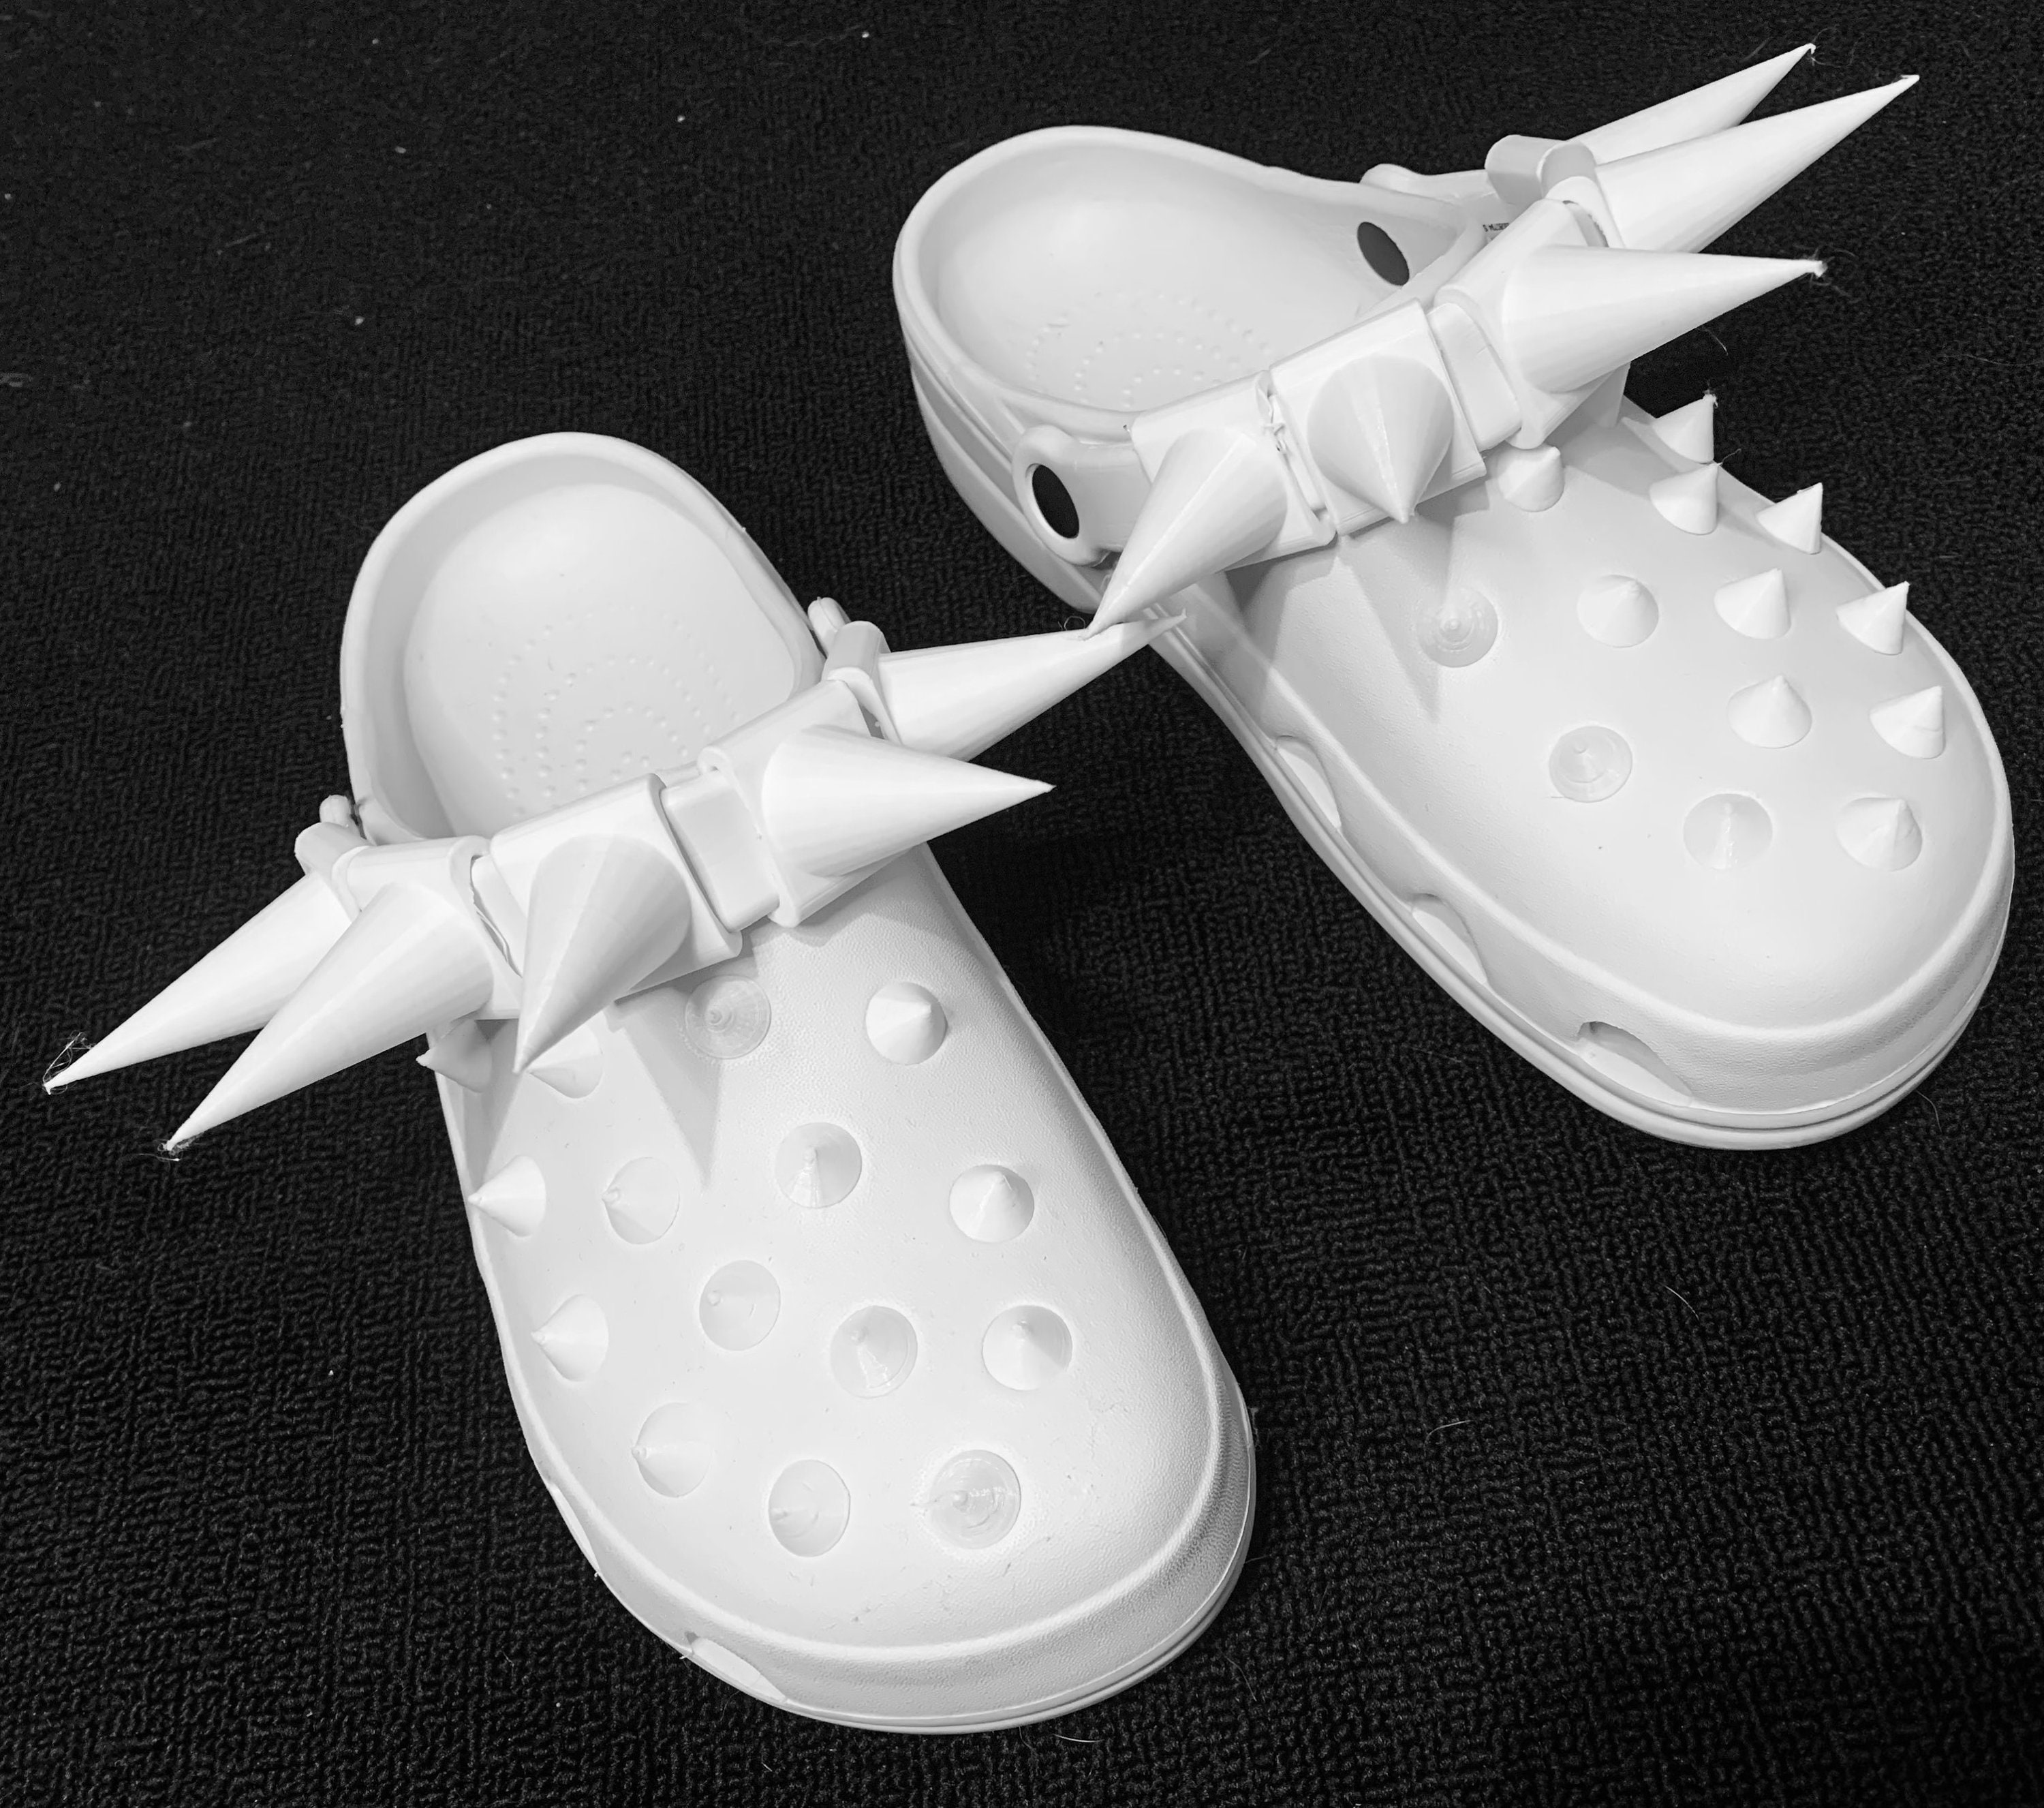 Ultimate Big Shoes Spikes, 10 Spike Shoes Charm Set, Spikes Shoes Charms, Gothic Shoe Charms, Spike Shoe Charm, Plastic Cone Spikes